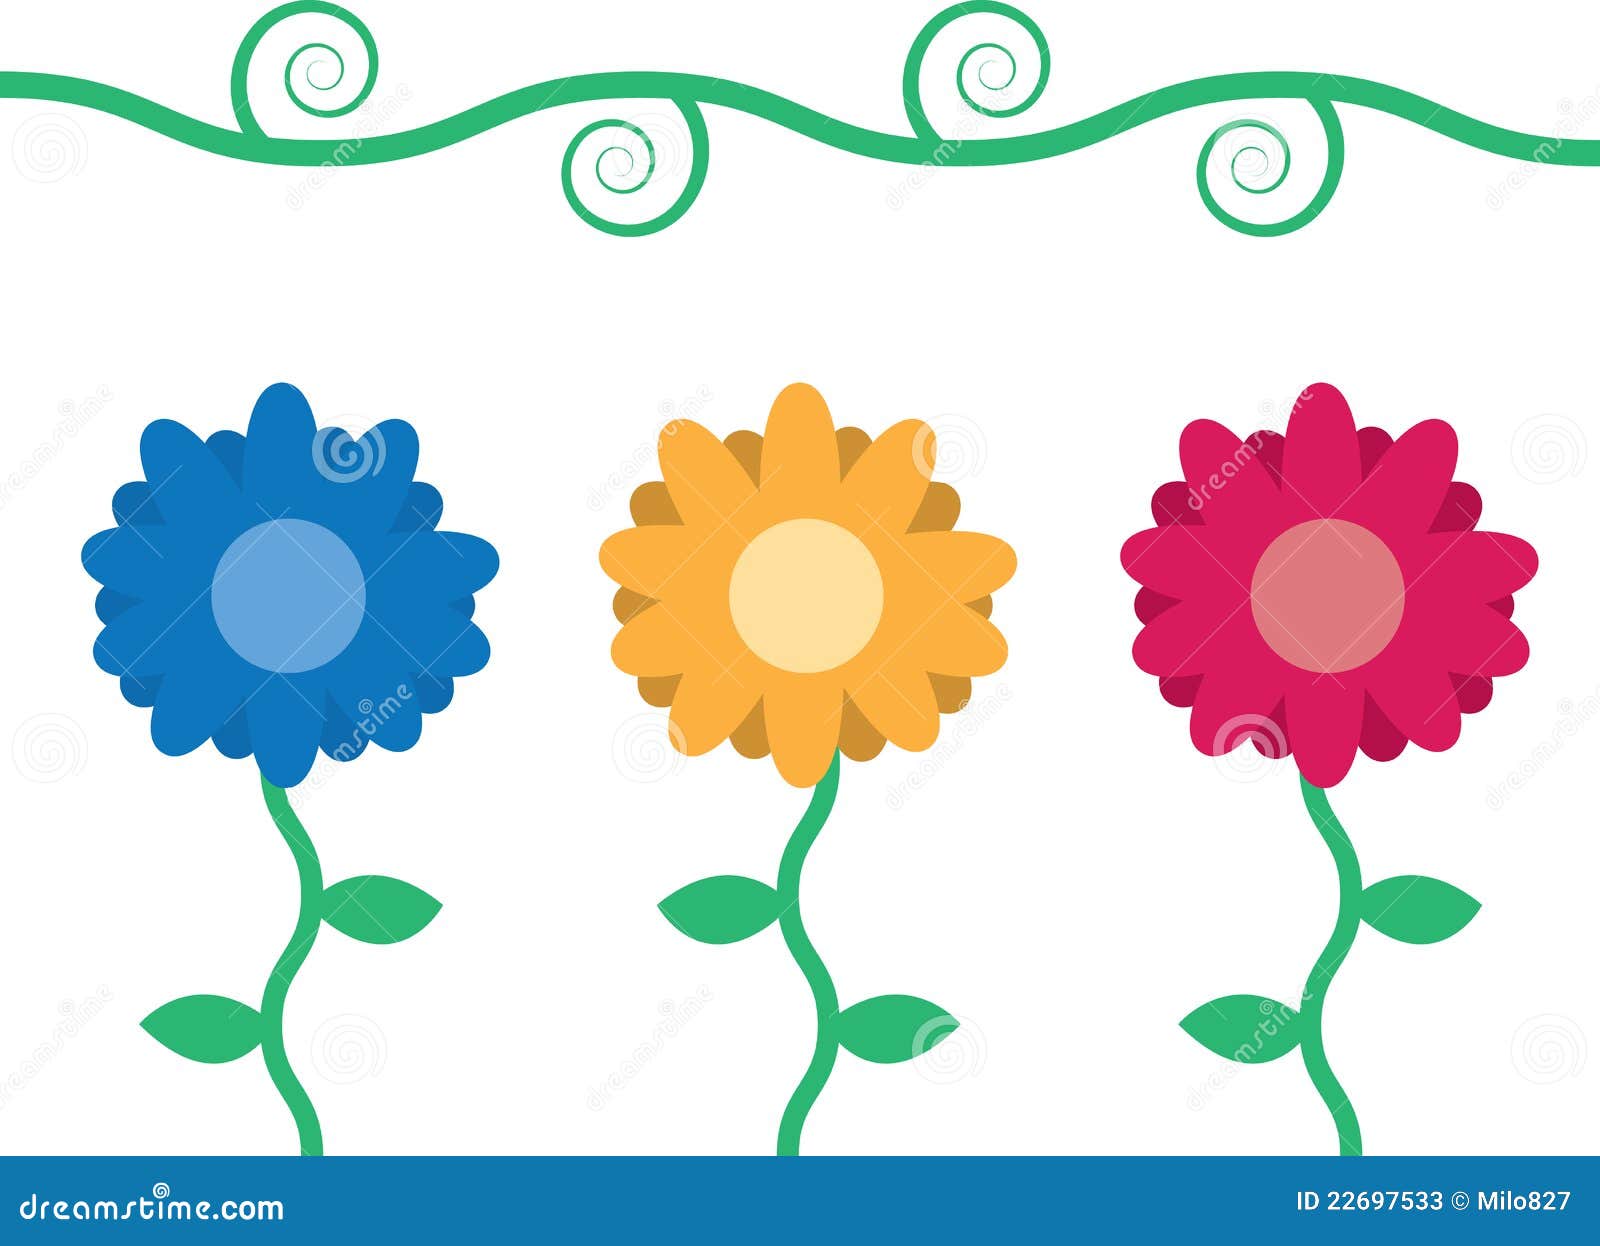 Flowers with Vine stock vector. Illustration of blue - 22697533